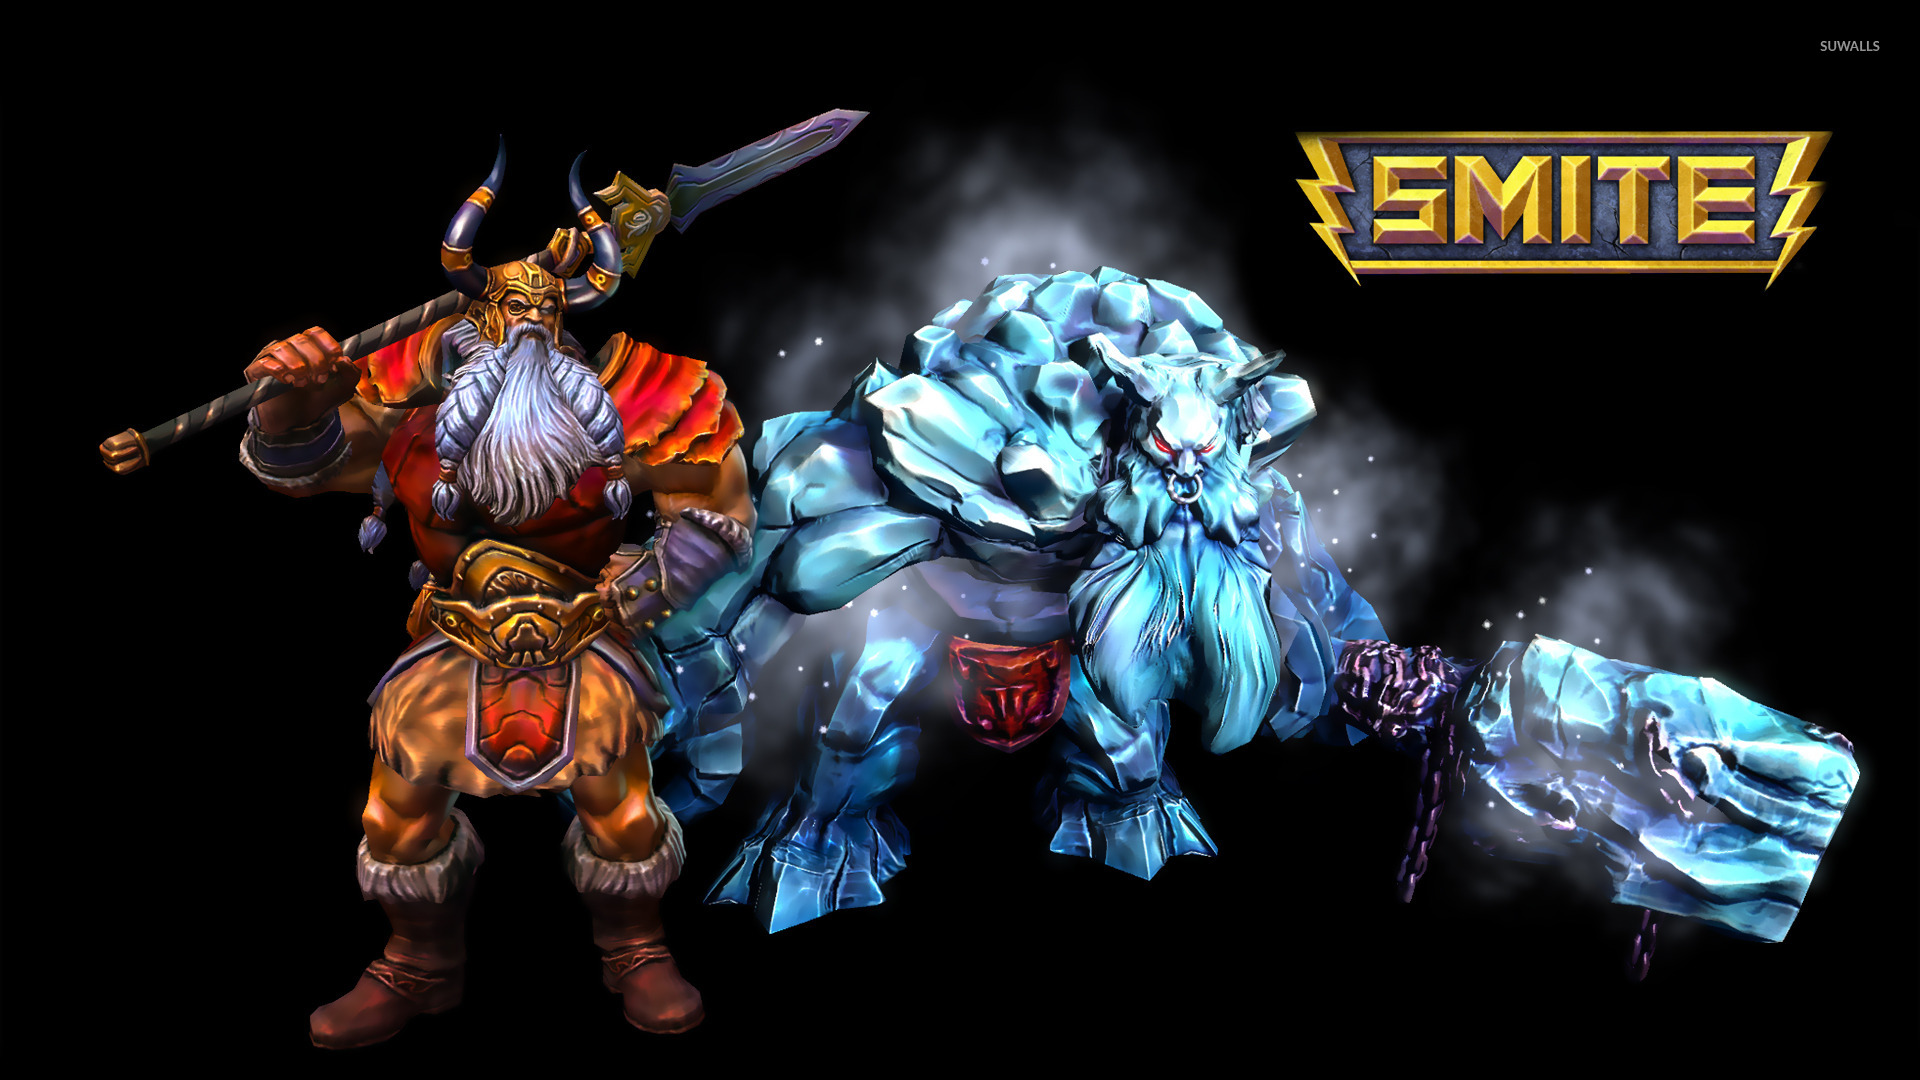 Odin and Ymir   Smite wallpaper   Game wallpapers   22399